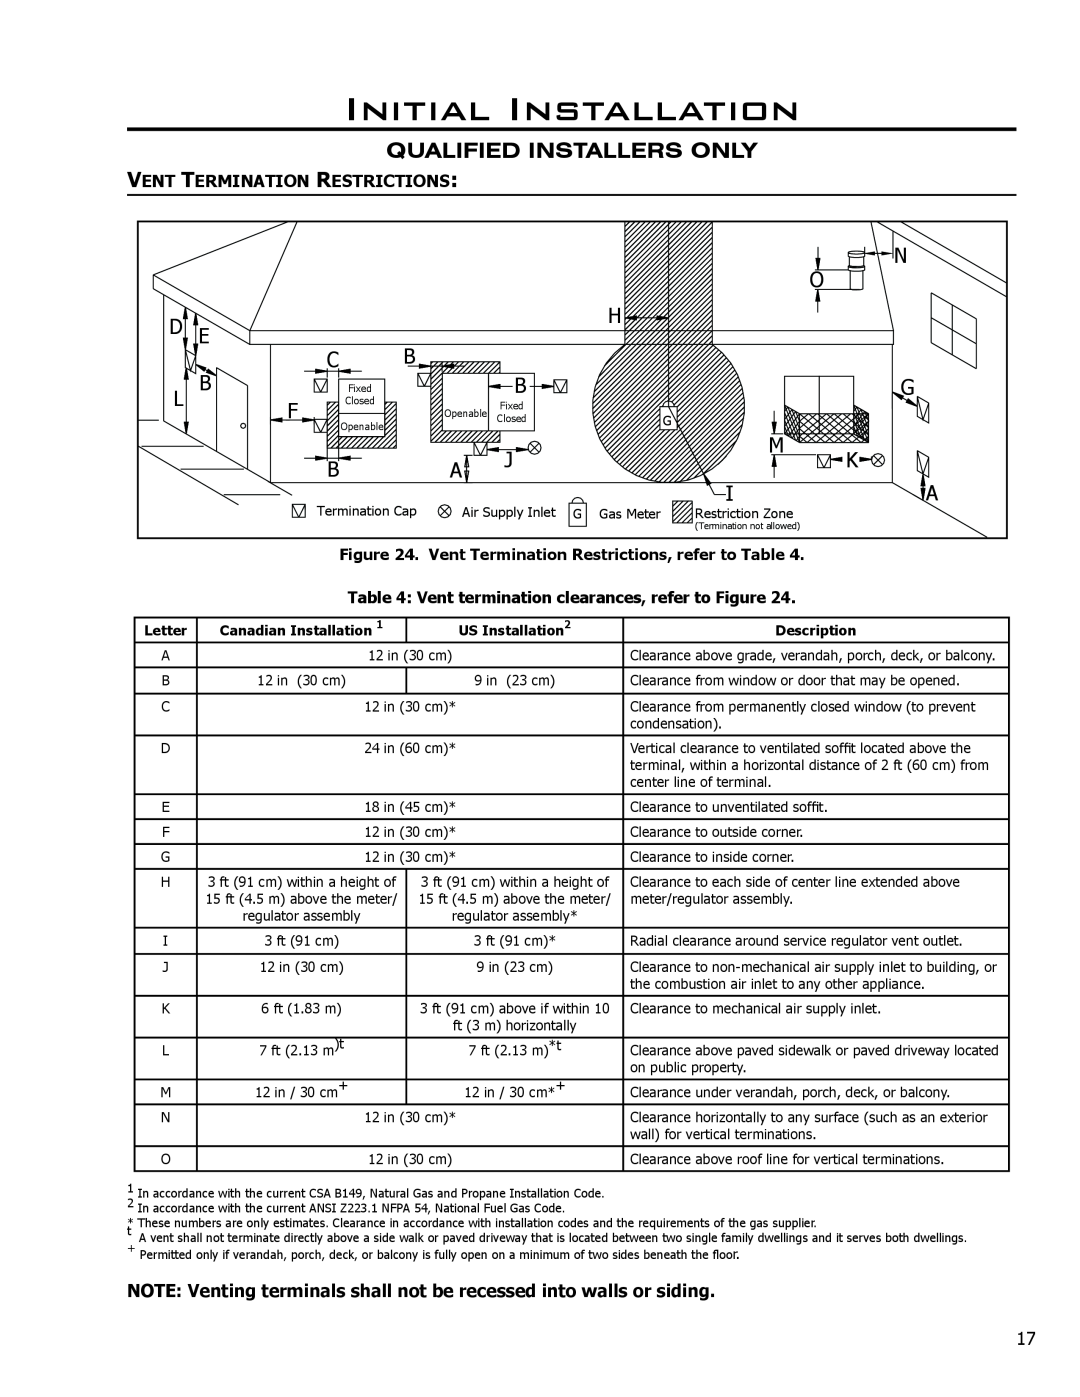 Enviro C-11275 owner manual Initial Installation, Qualified Installers Only 